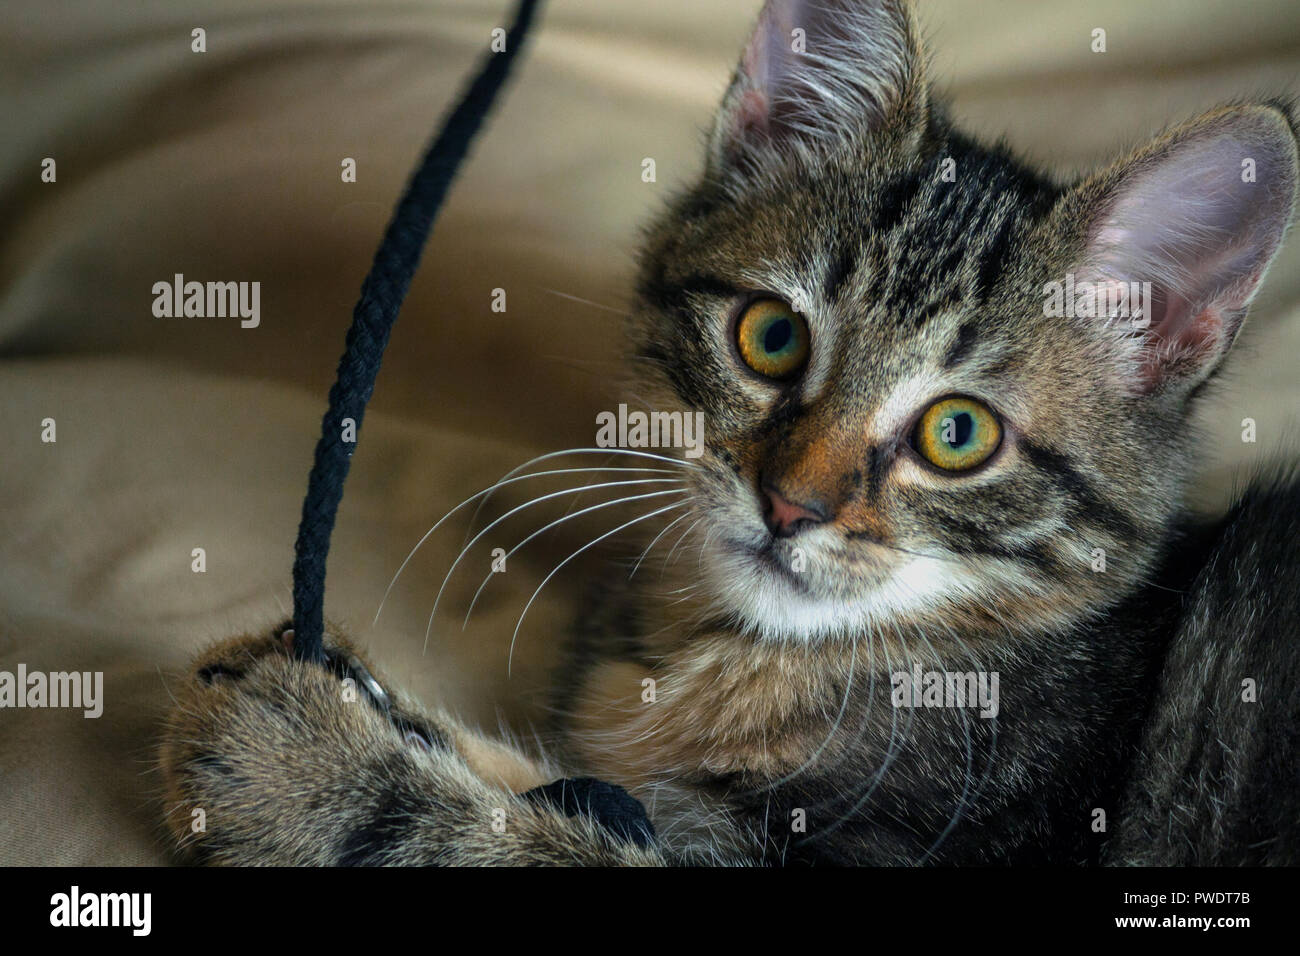 small mongrel kitten lying, looking at the camera, big ears and an orange nose, a striped animal, in the background a yellowish tint fabric, portrait, Stock Photo